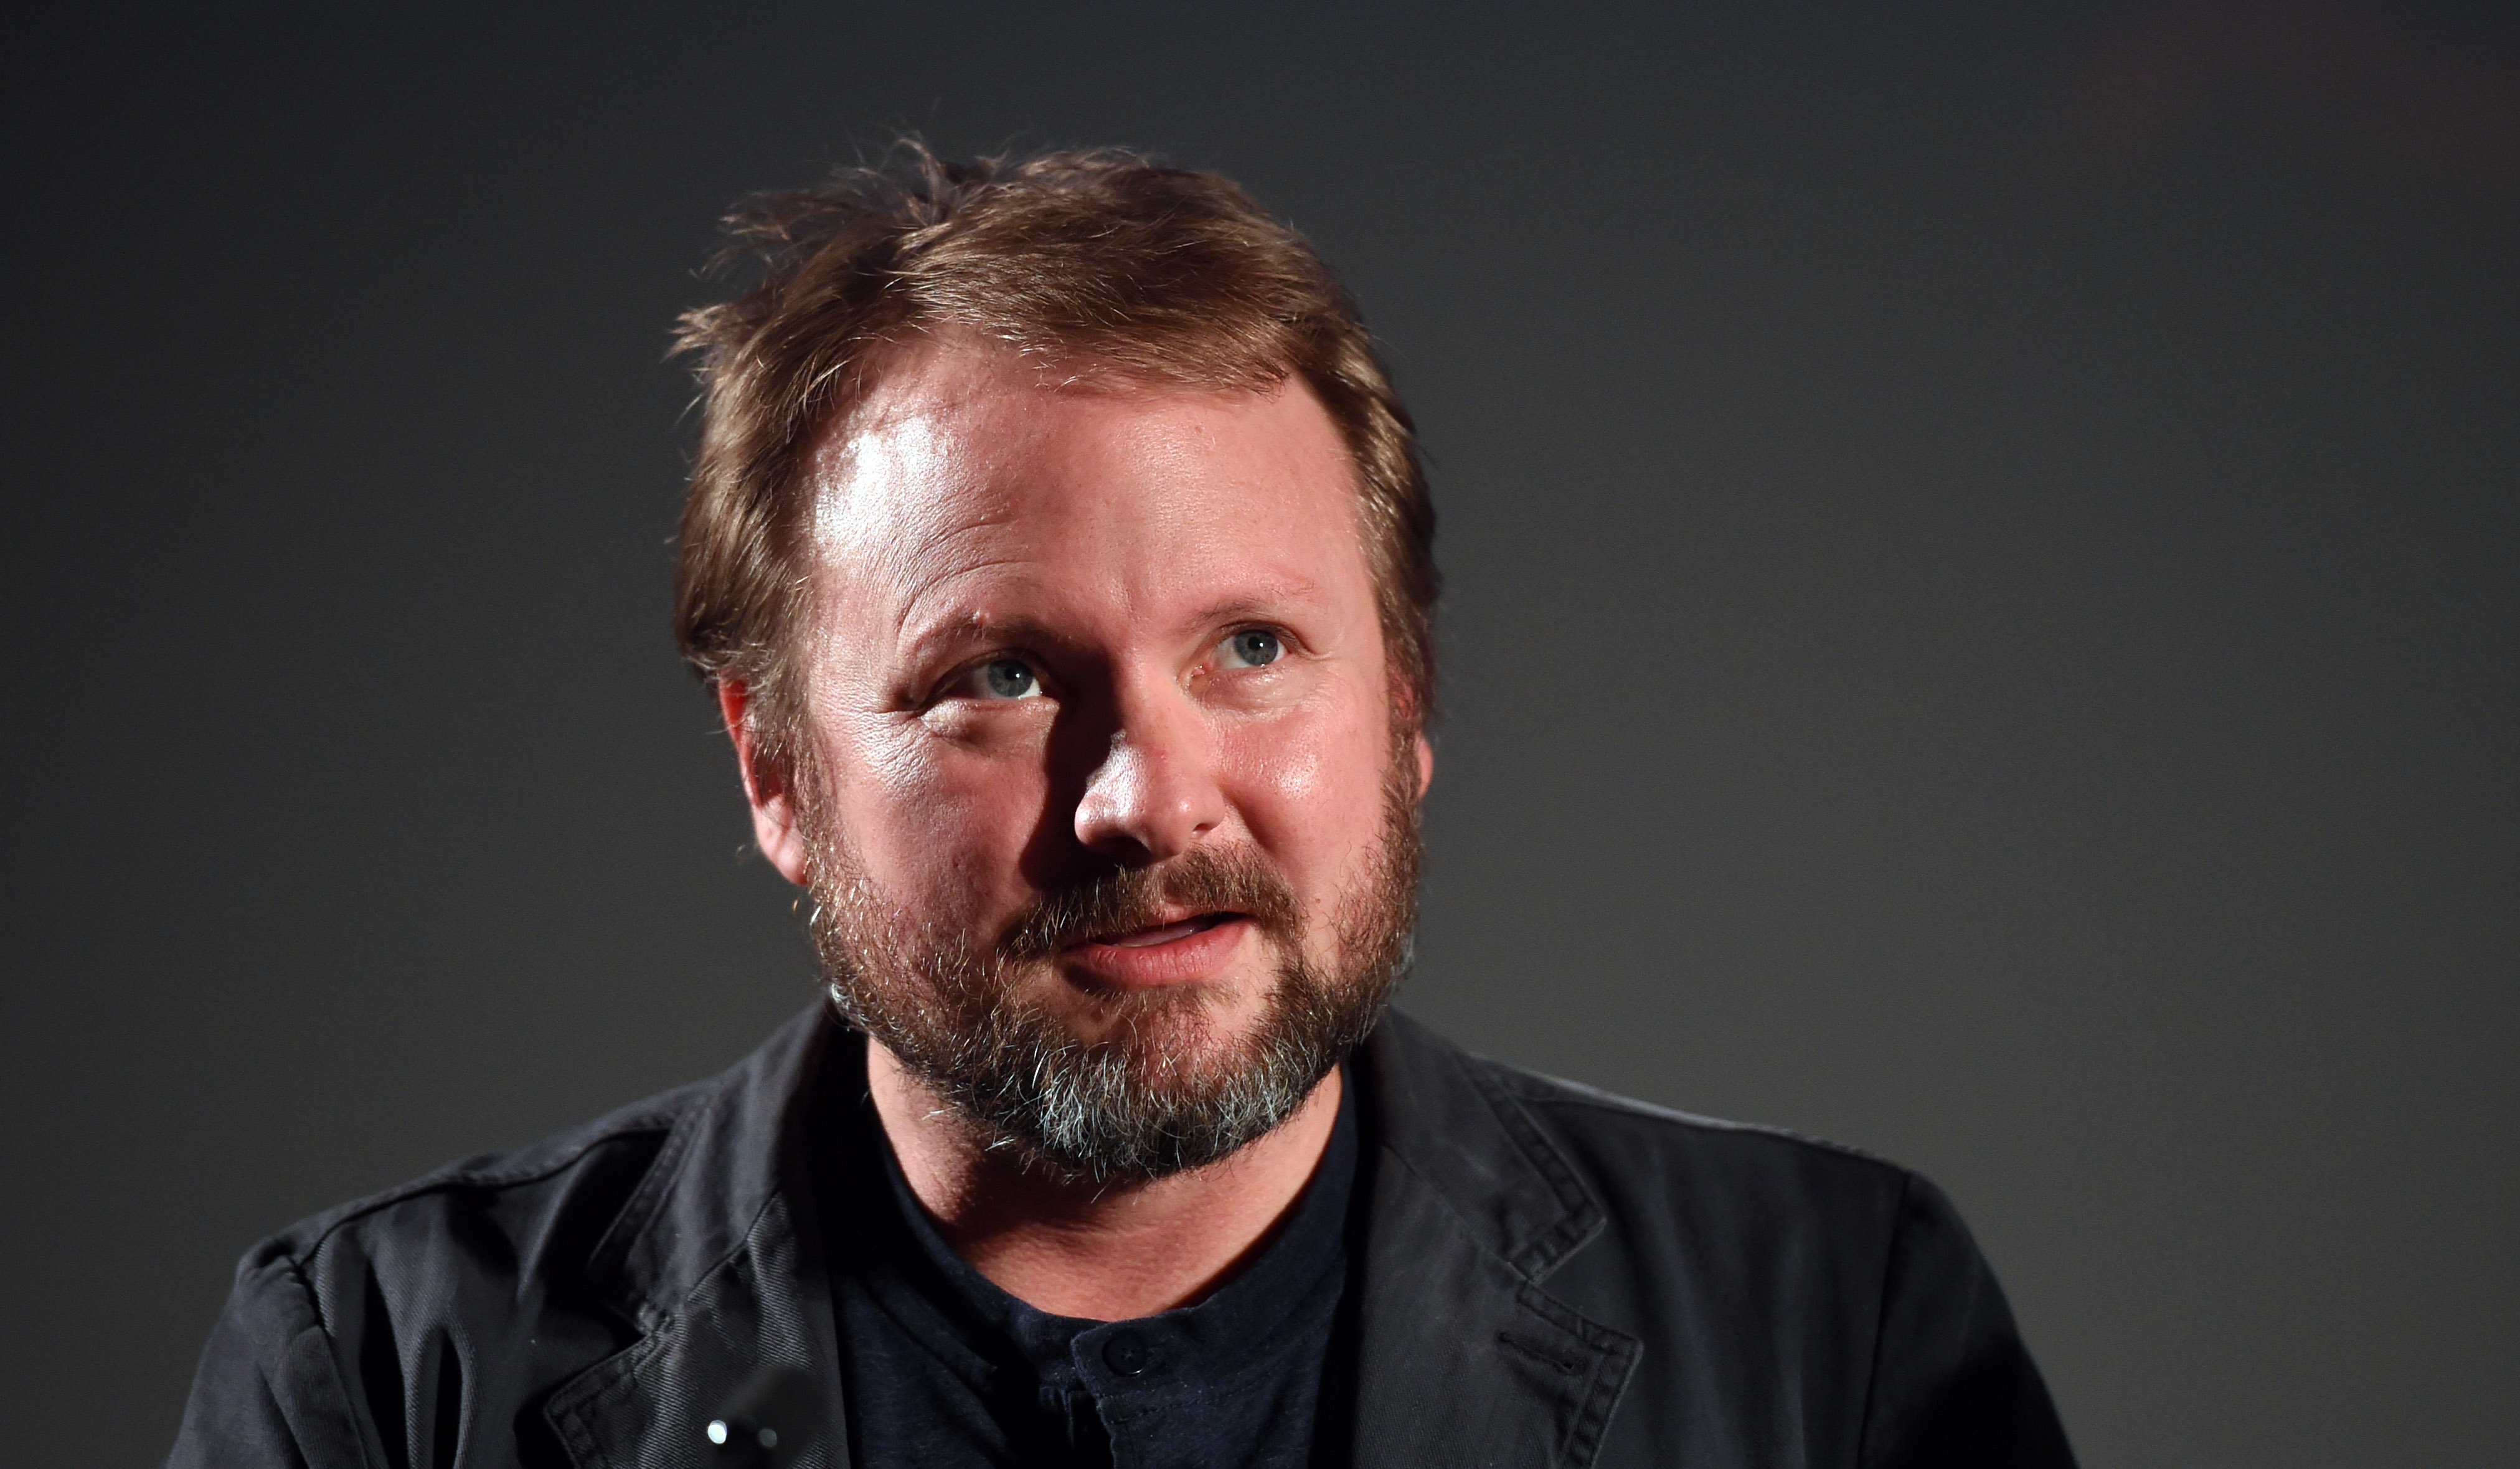 The Last Jedi director Rian Johnson is getting his own Star Wars